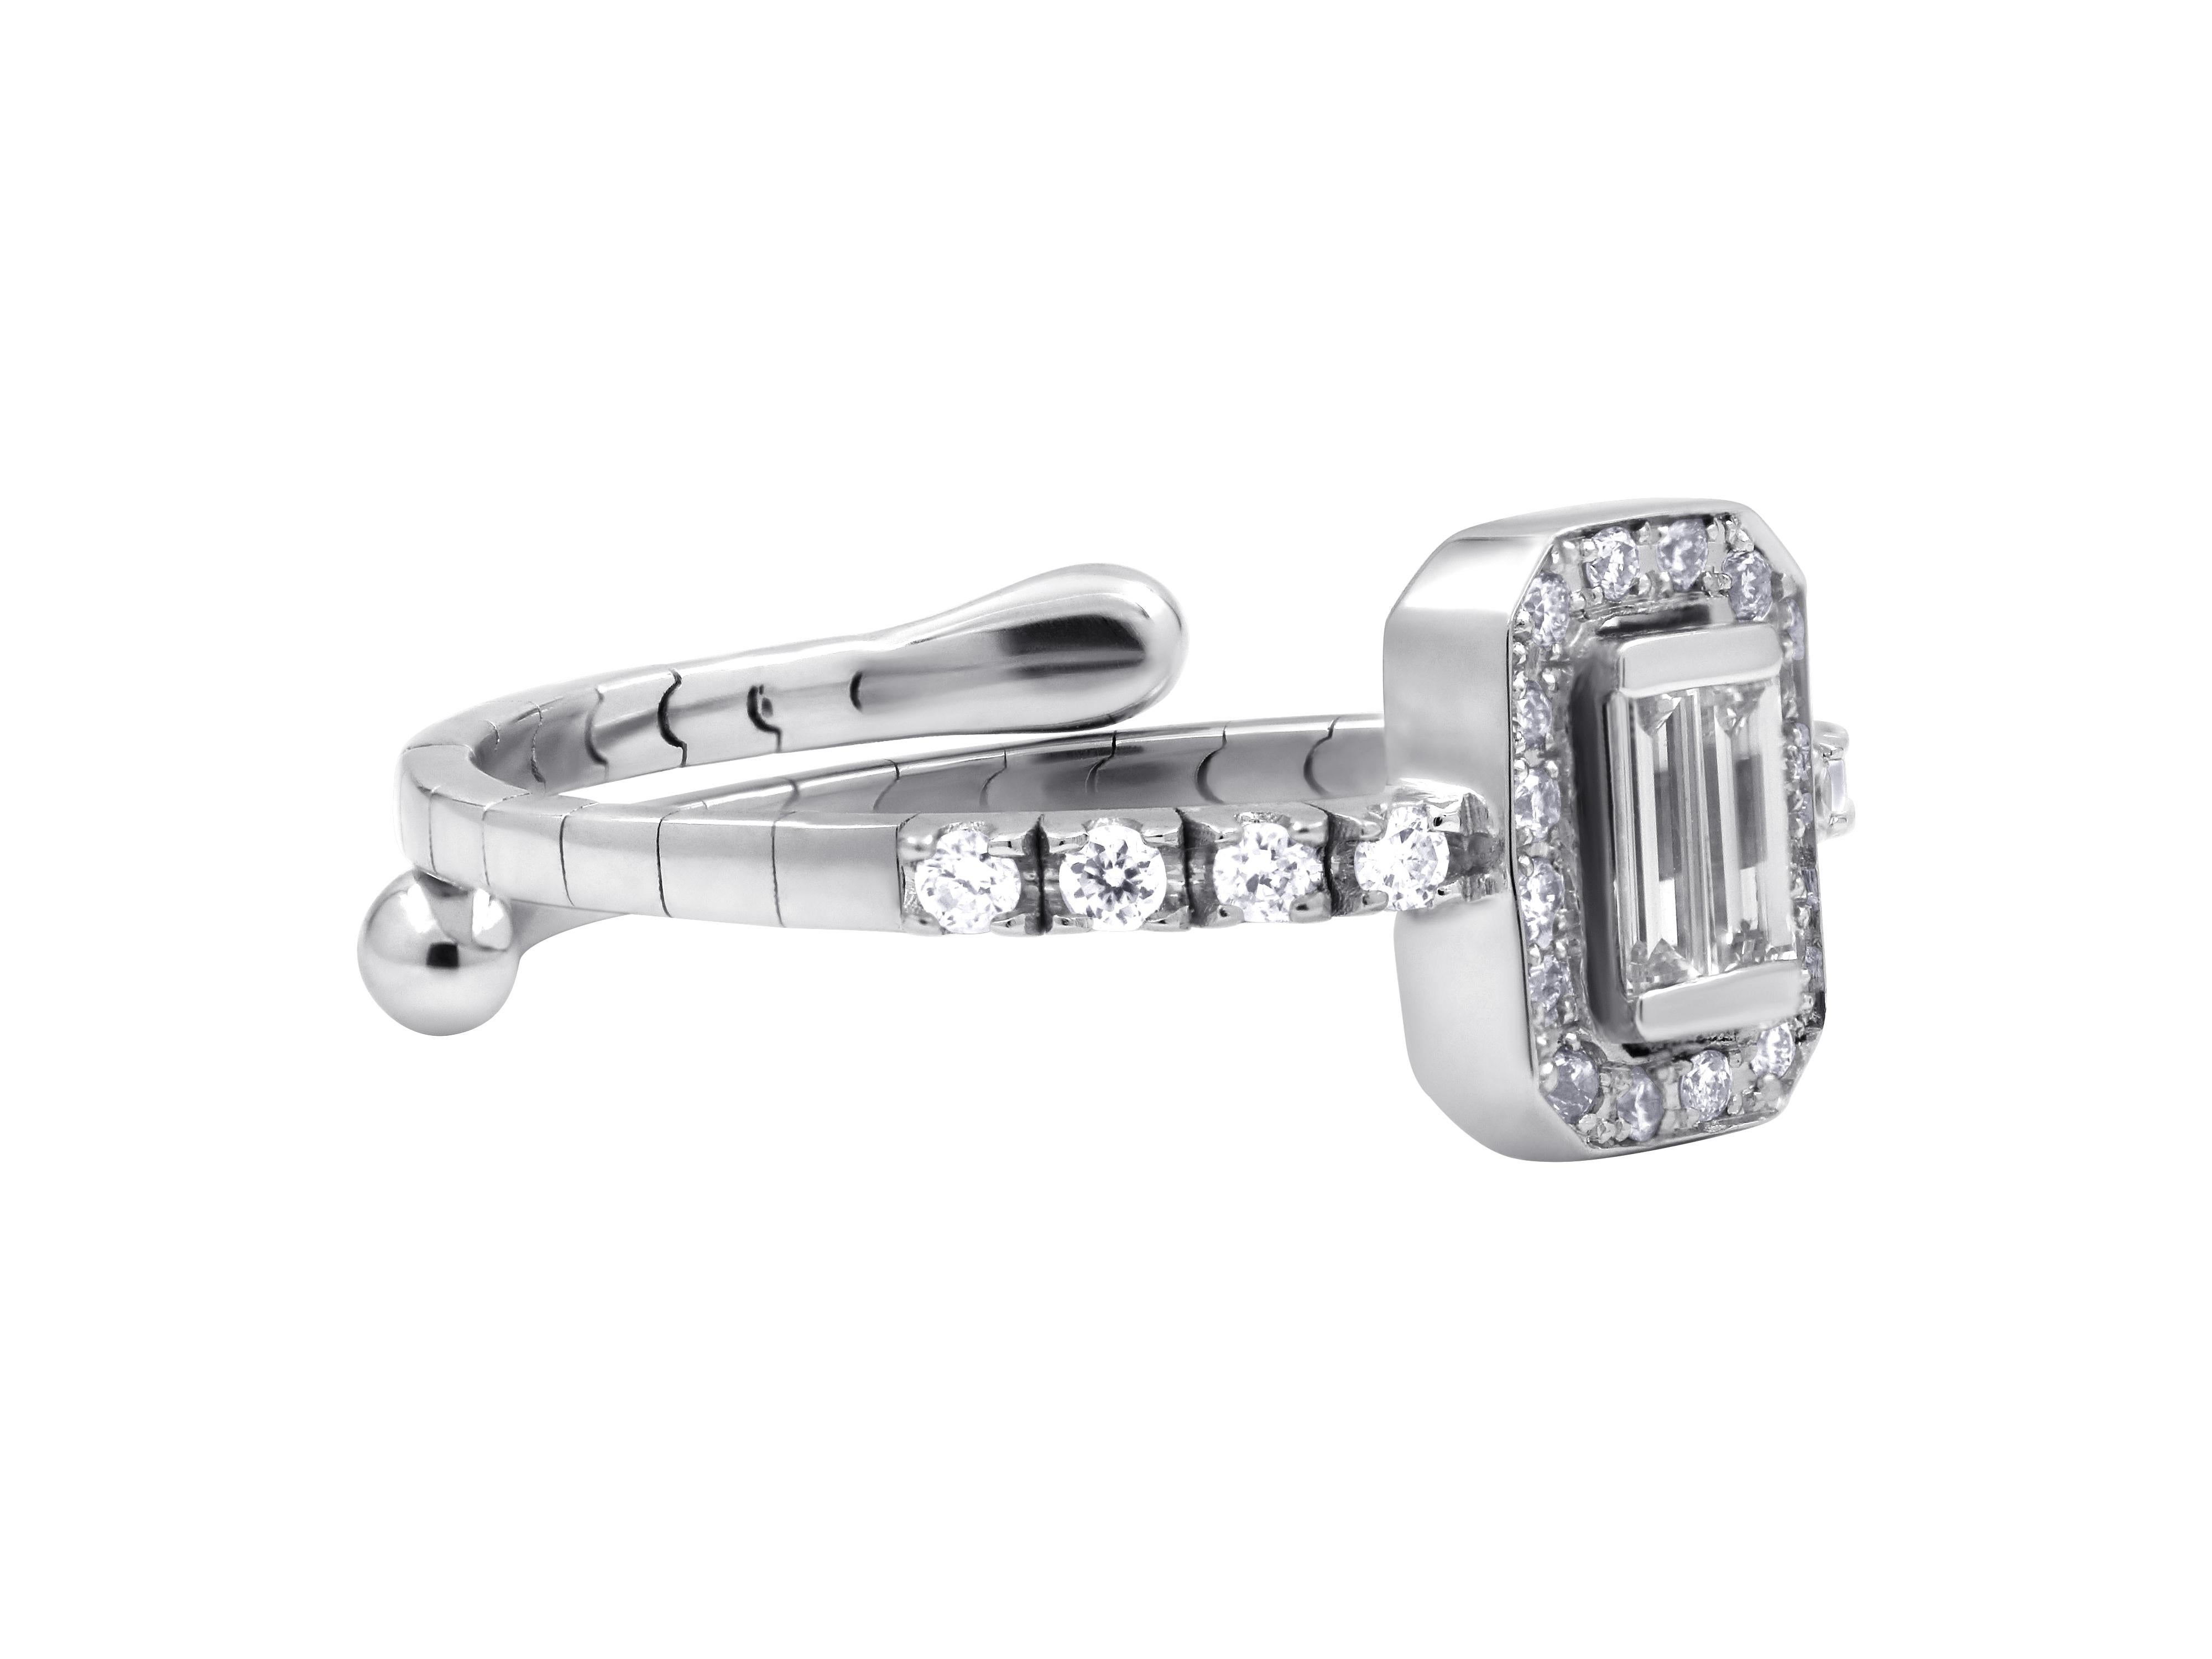 Flexible adjustable ring in 18k white gold with 0.16 carats baguette diamonds and 0.16 carats brilliant cut diamonds. 